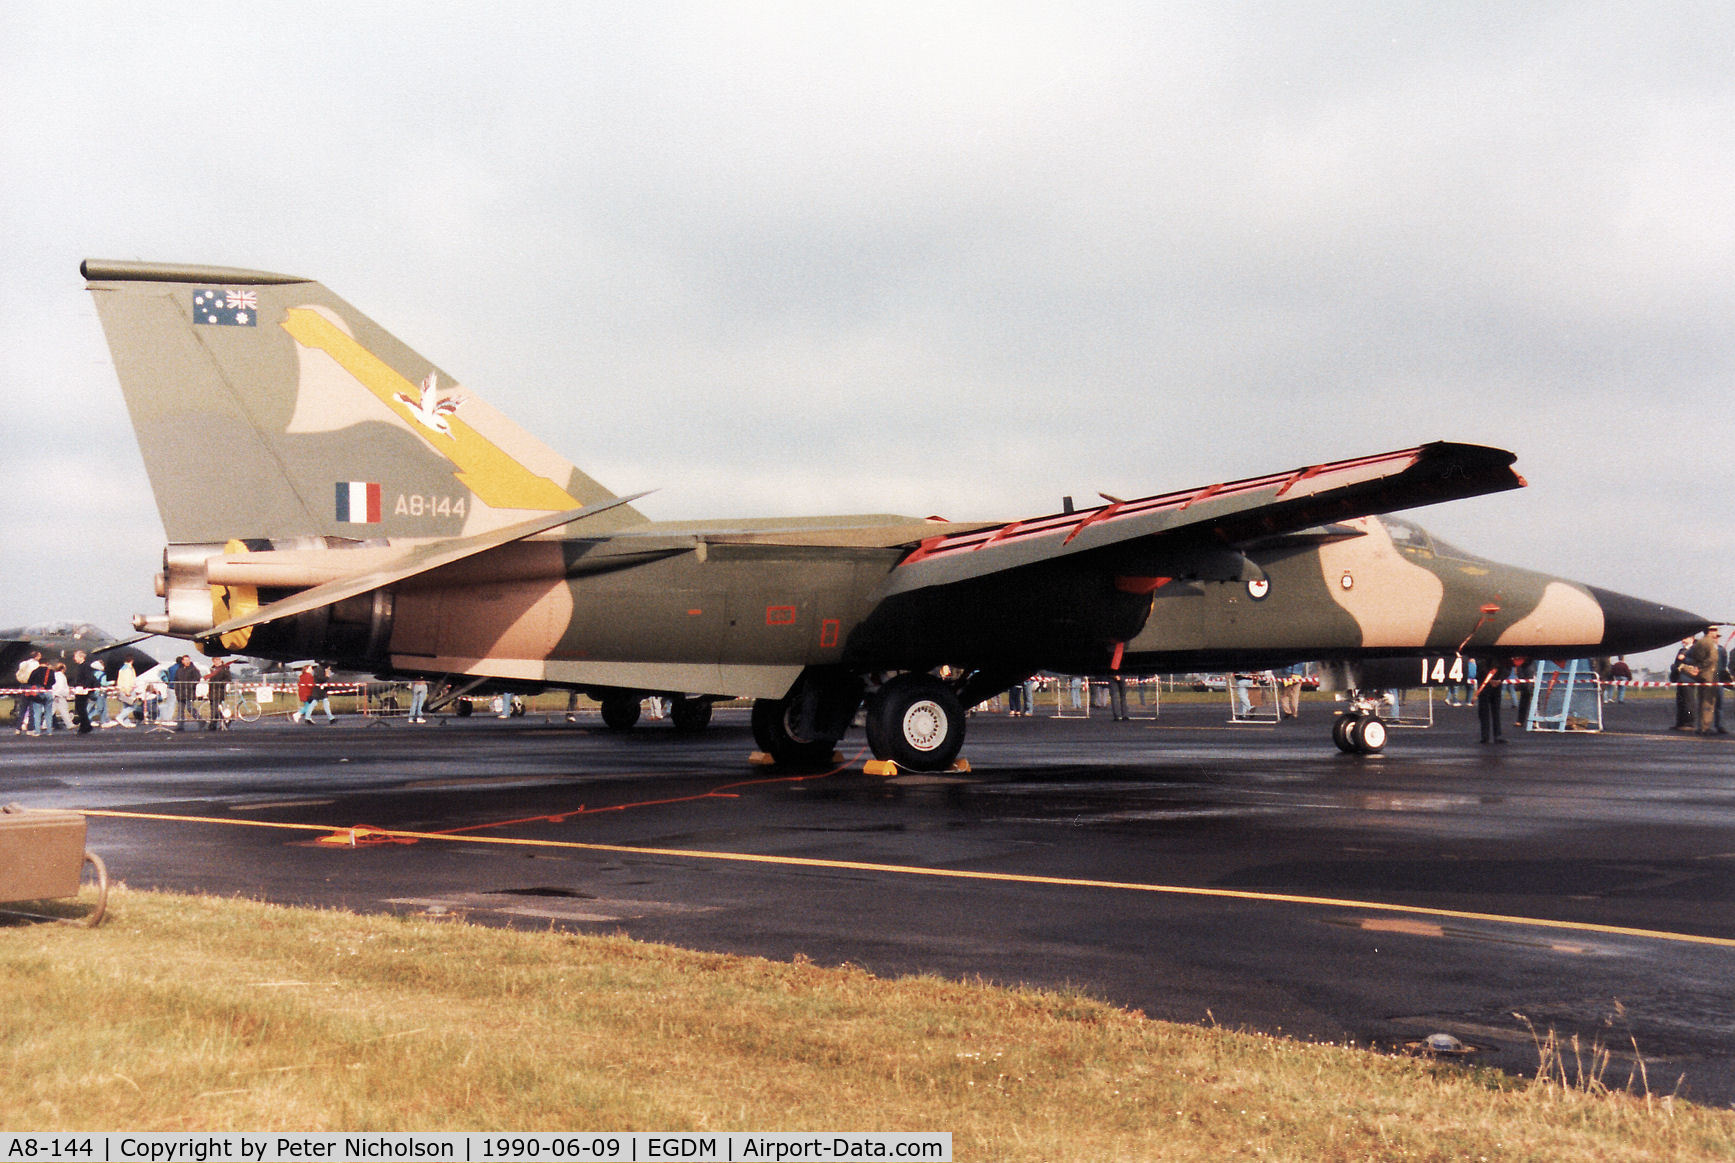 A8-144, 1973 General Dynamics F-111C Aardvark C/N D1-20, F-111C of 1 Squadron Royal Australian Air Force on display at the 1990 Boscombe Down Battle of Britain 50th Anniversary Airshow.